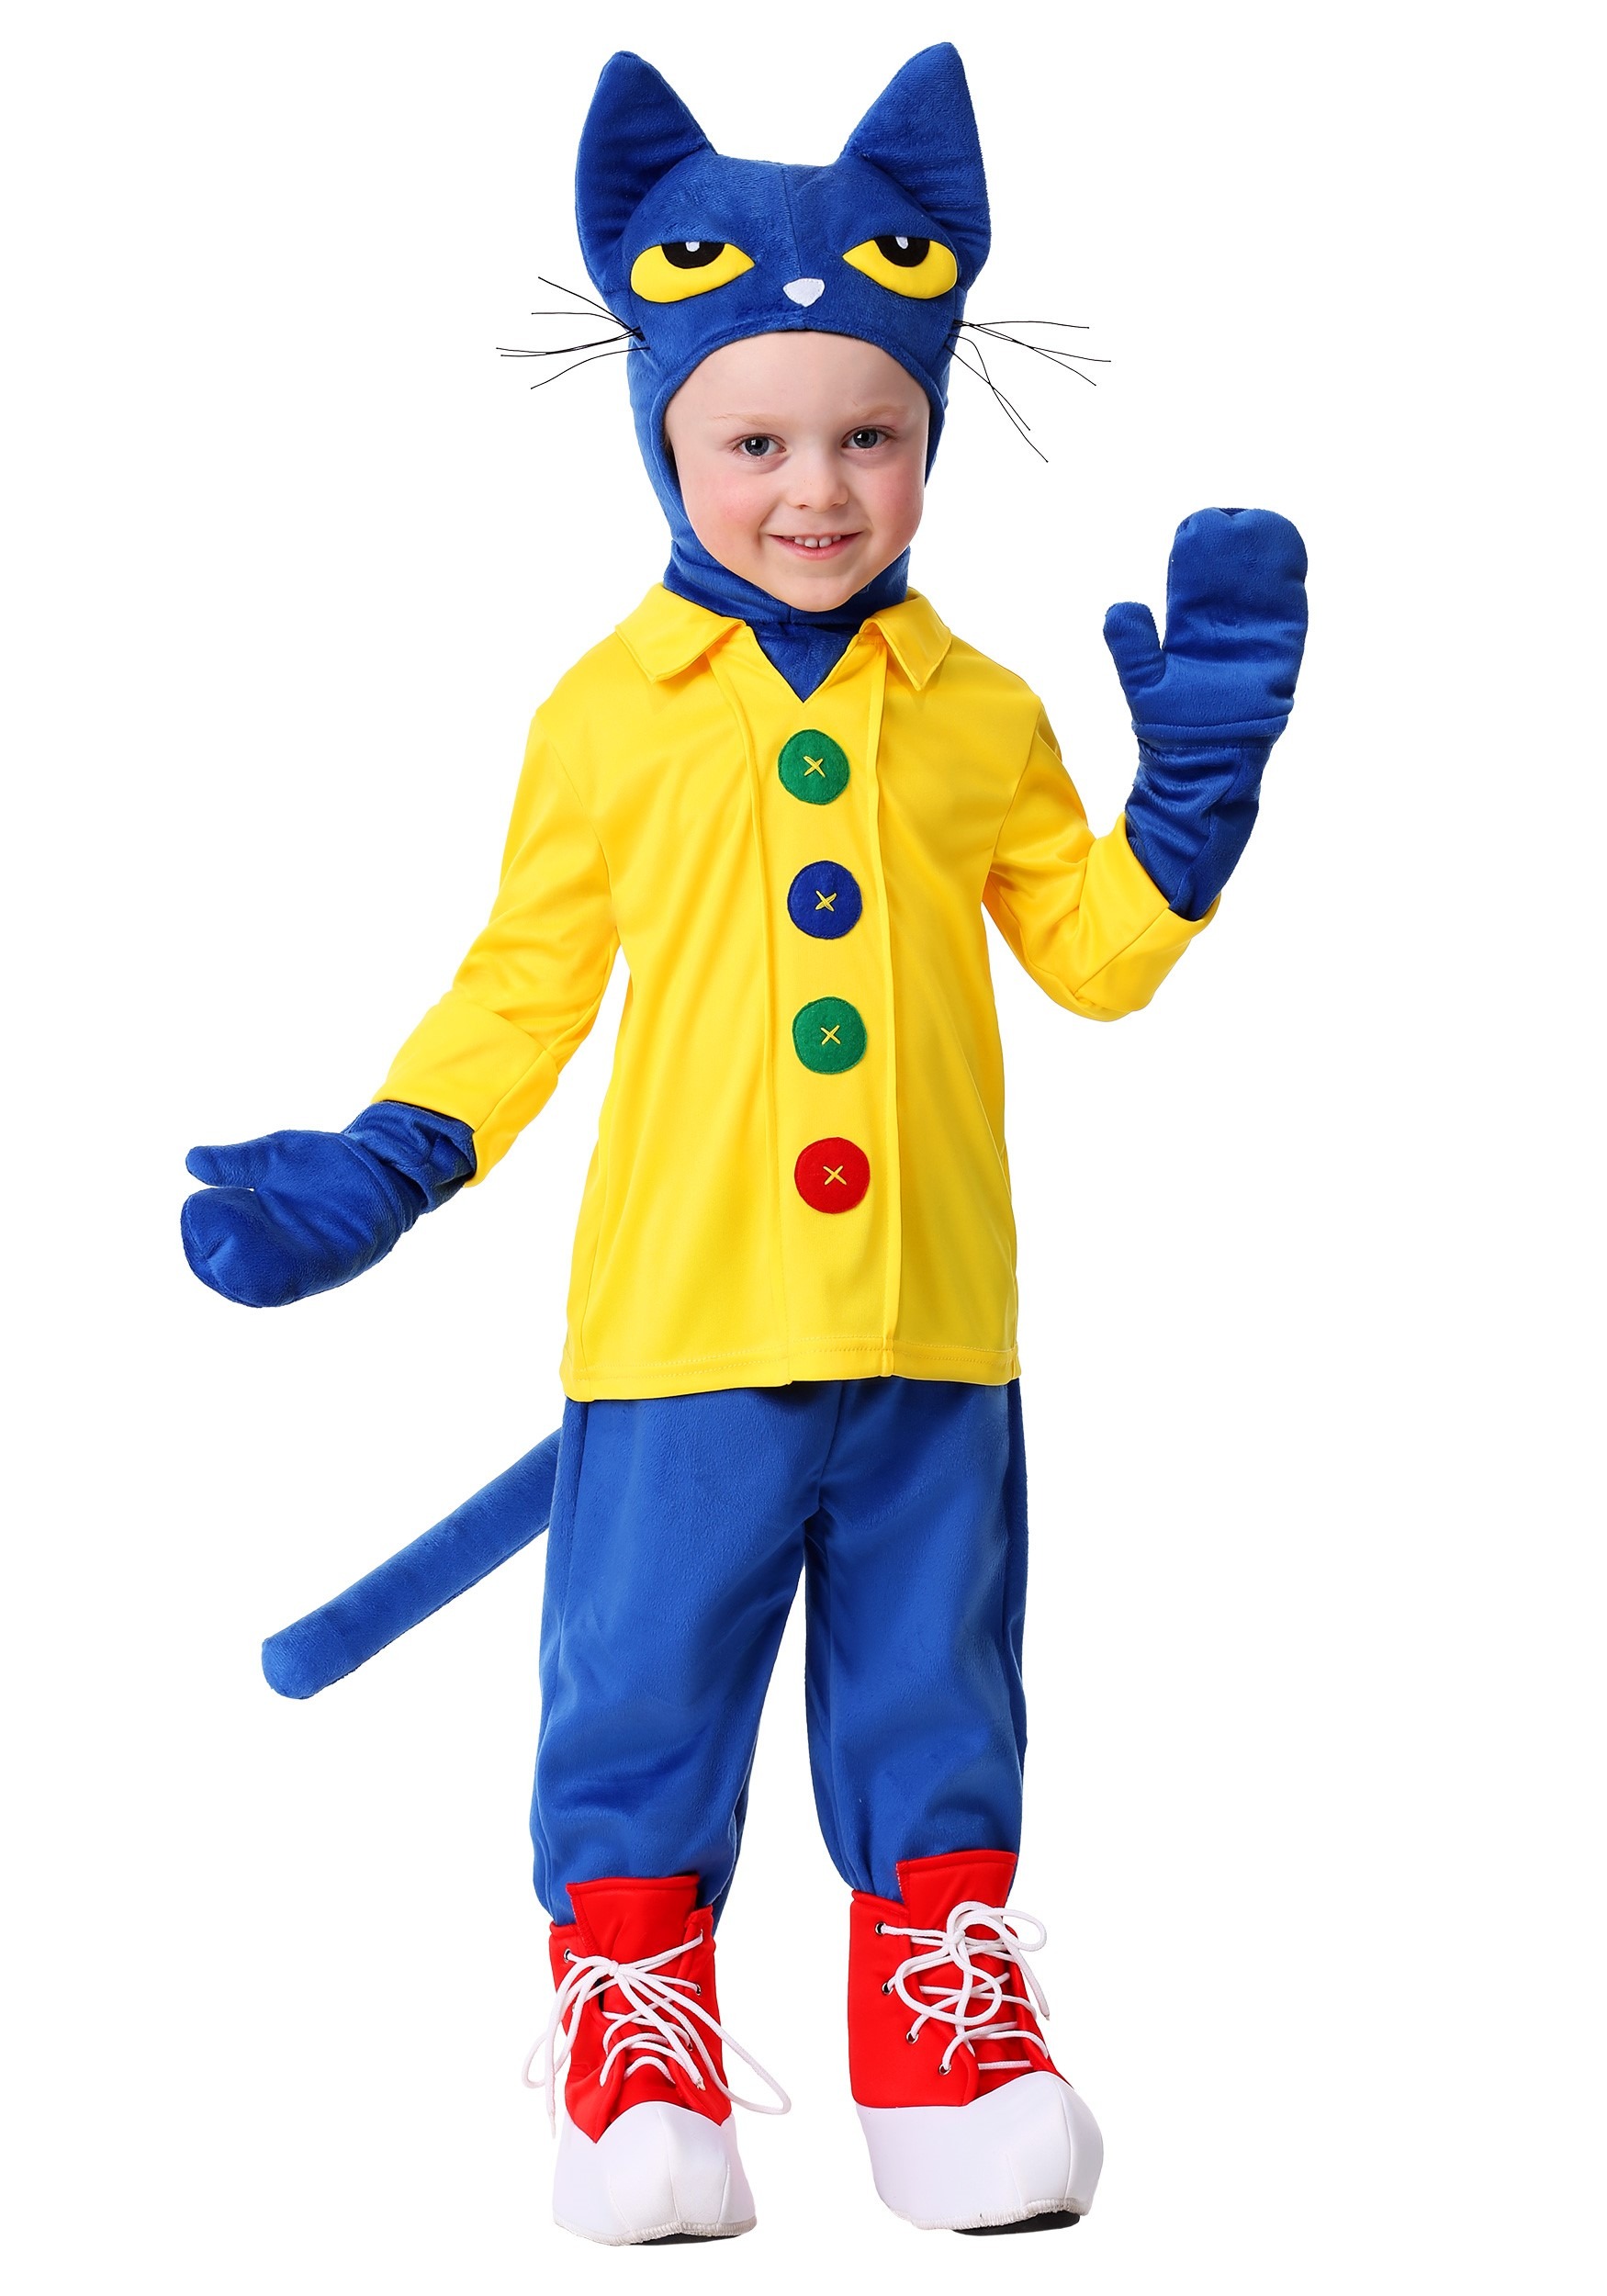 Photos - Fancy Dress CATerpillar FUN Costumes Toddler Pete the Cat Costume | Storybook Character Costume Bl 